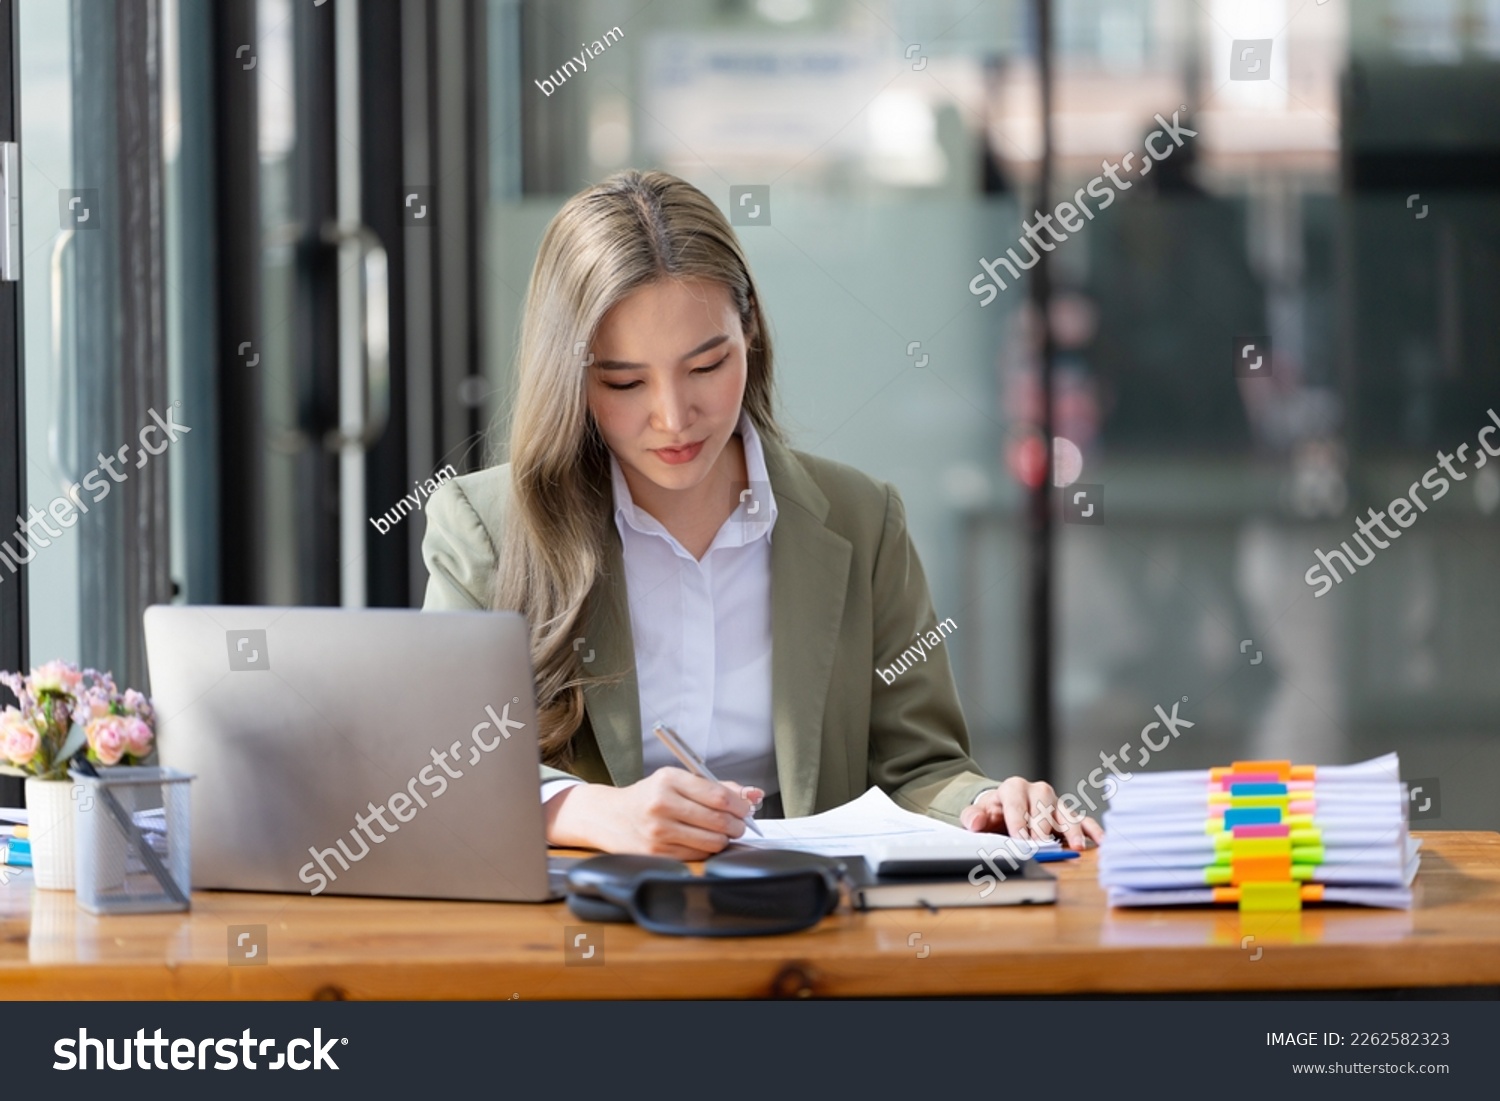 Businesswoman working at the workplace. beautiful Asian woman in a casual suit working reading a book, preparing for a meeting or interview in the office. #2262582323